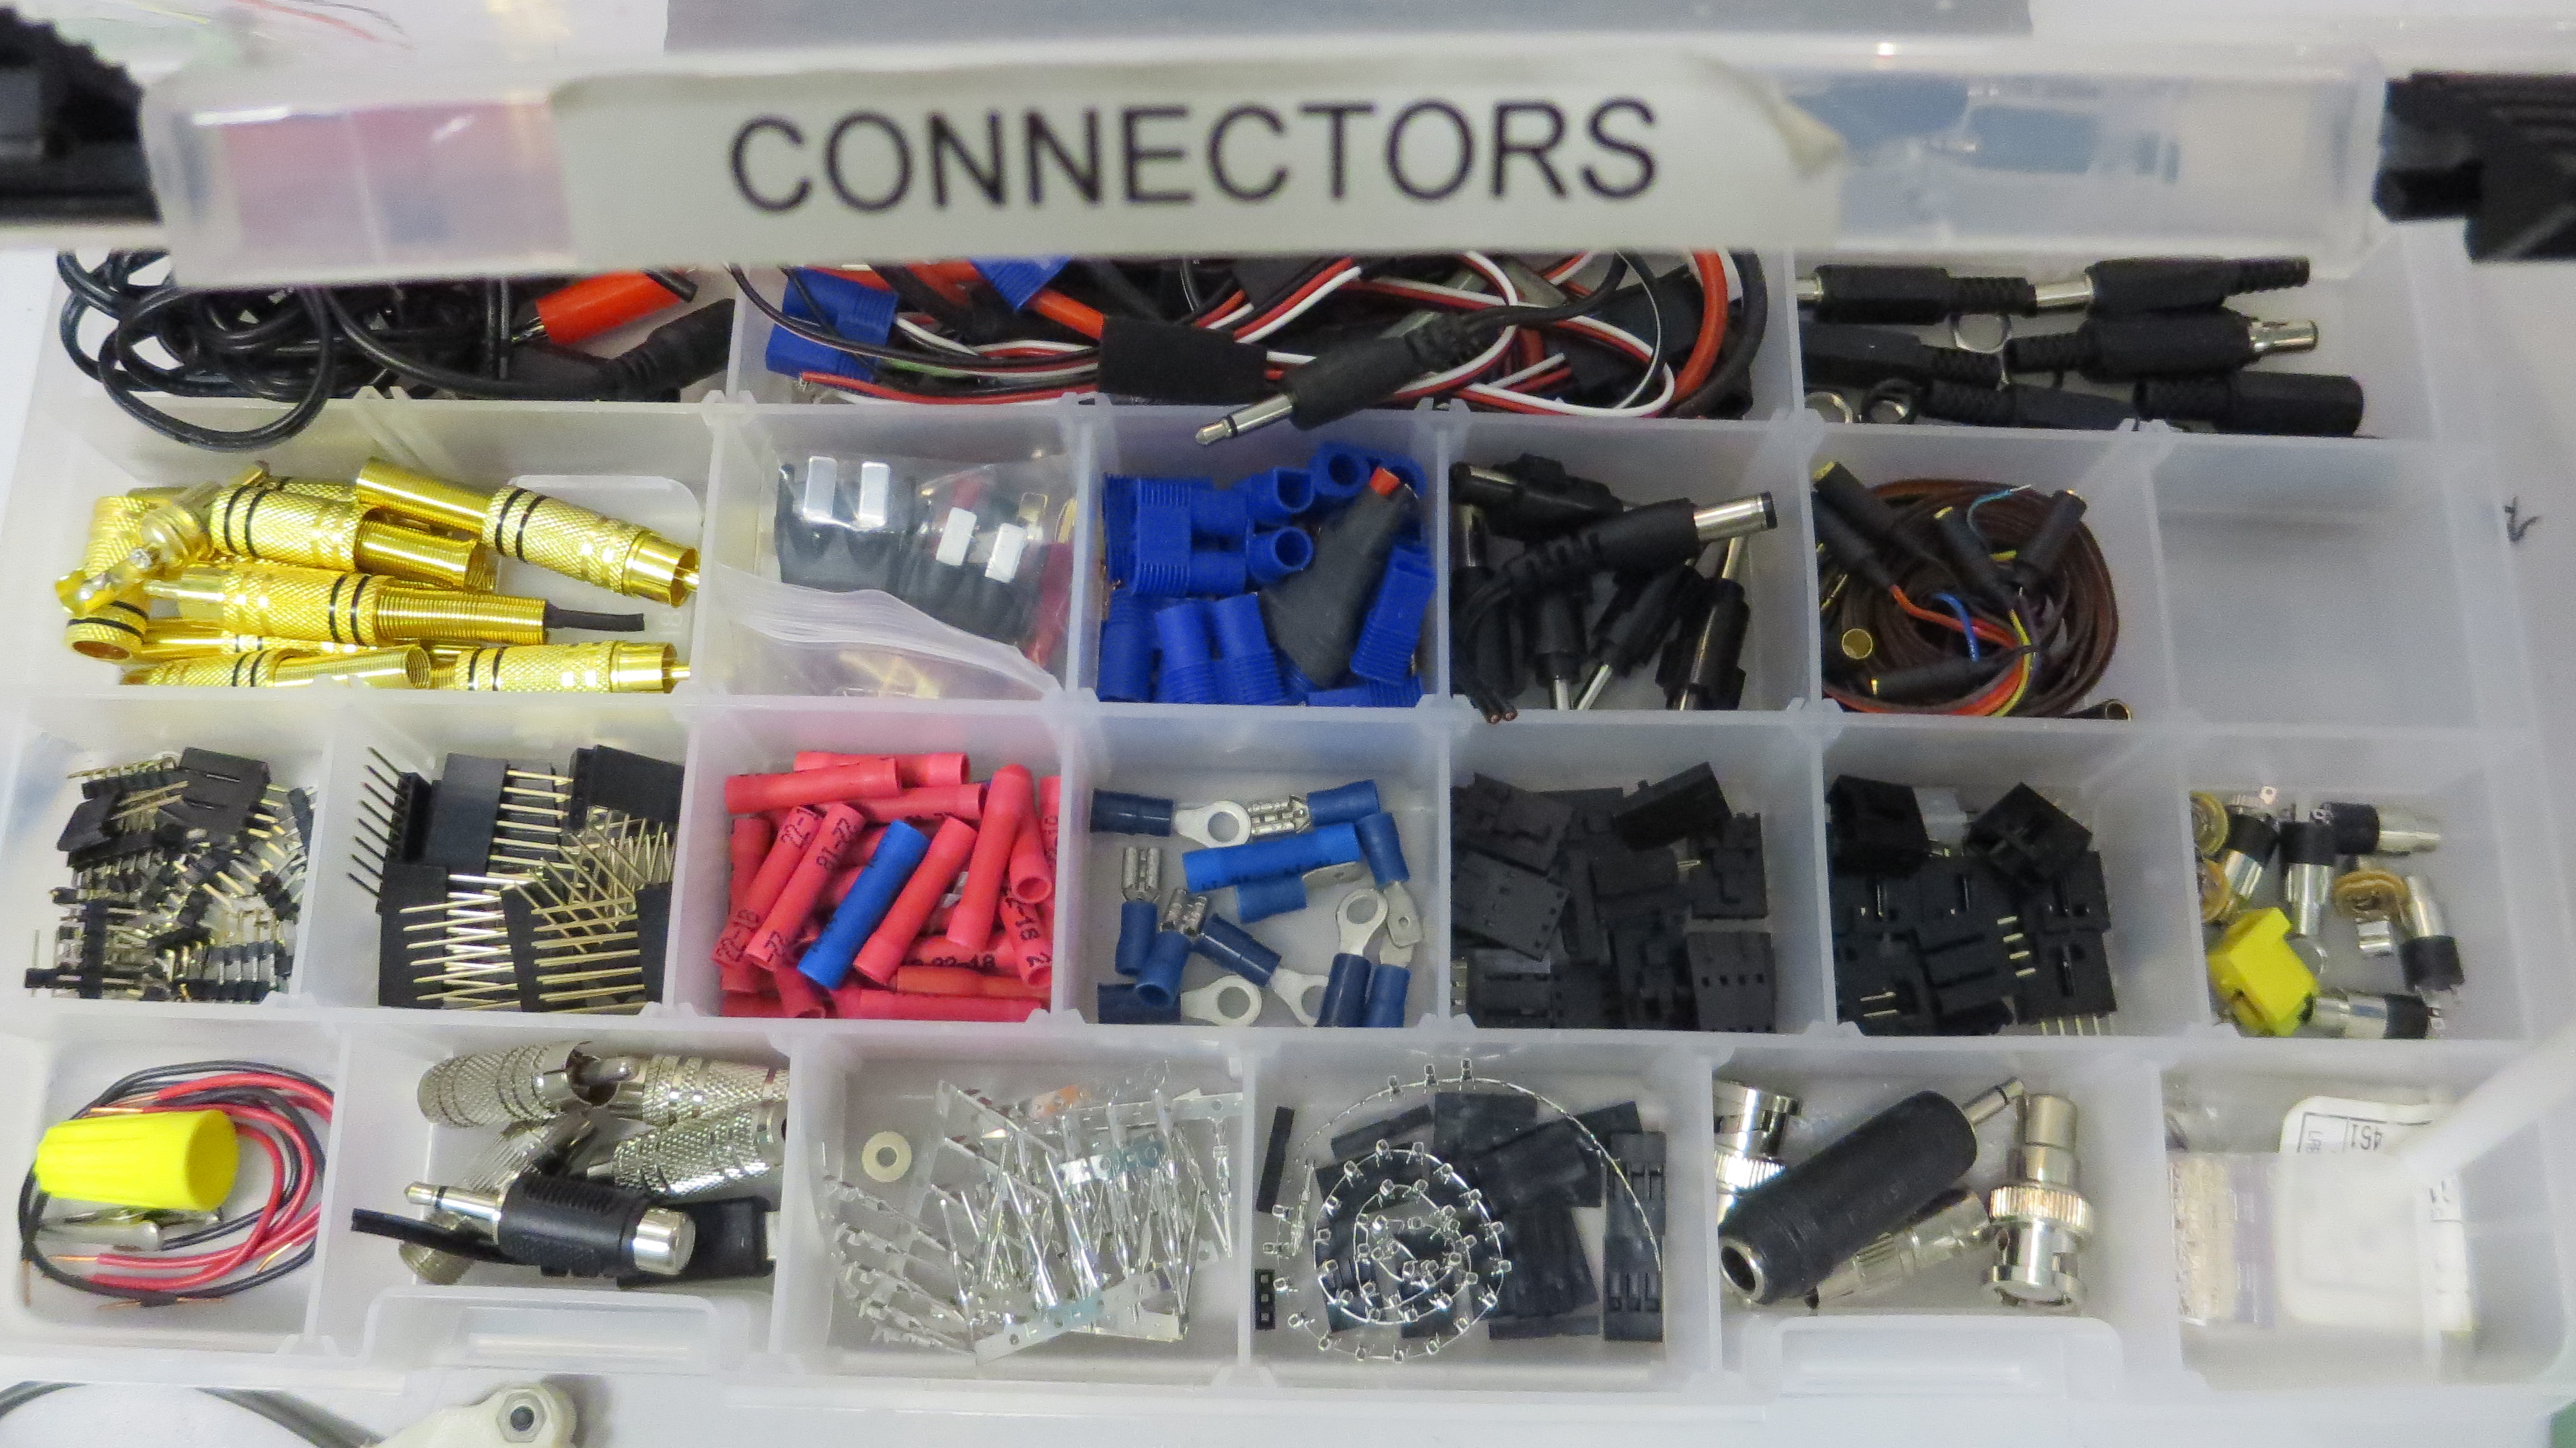 A box full of different connectors used in Spark!Lab